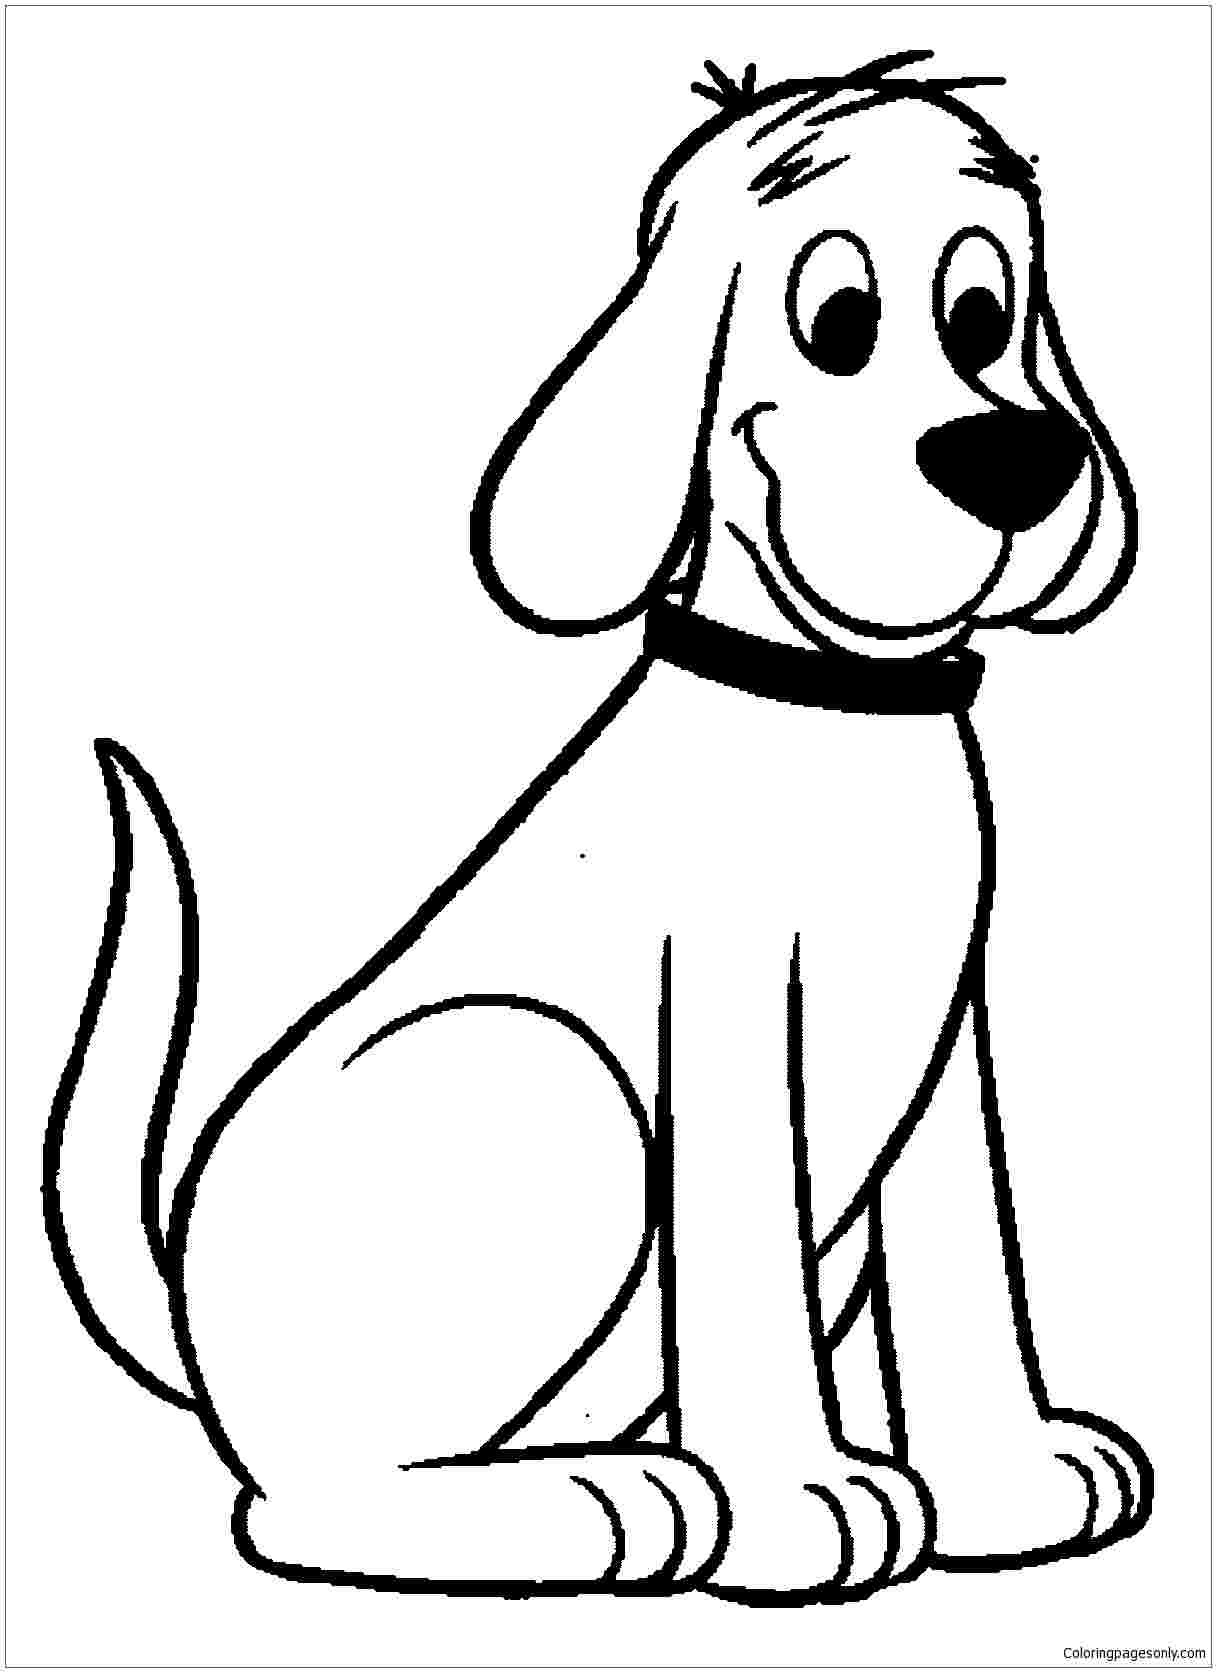 superhero dog coloring underdog for adults the kids cats and dogs